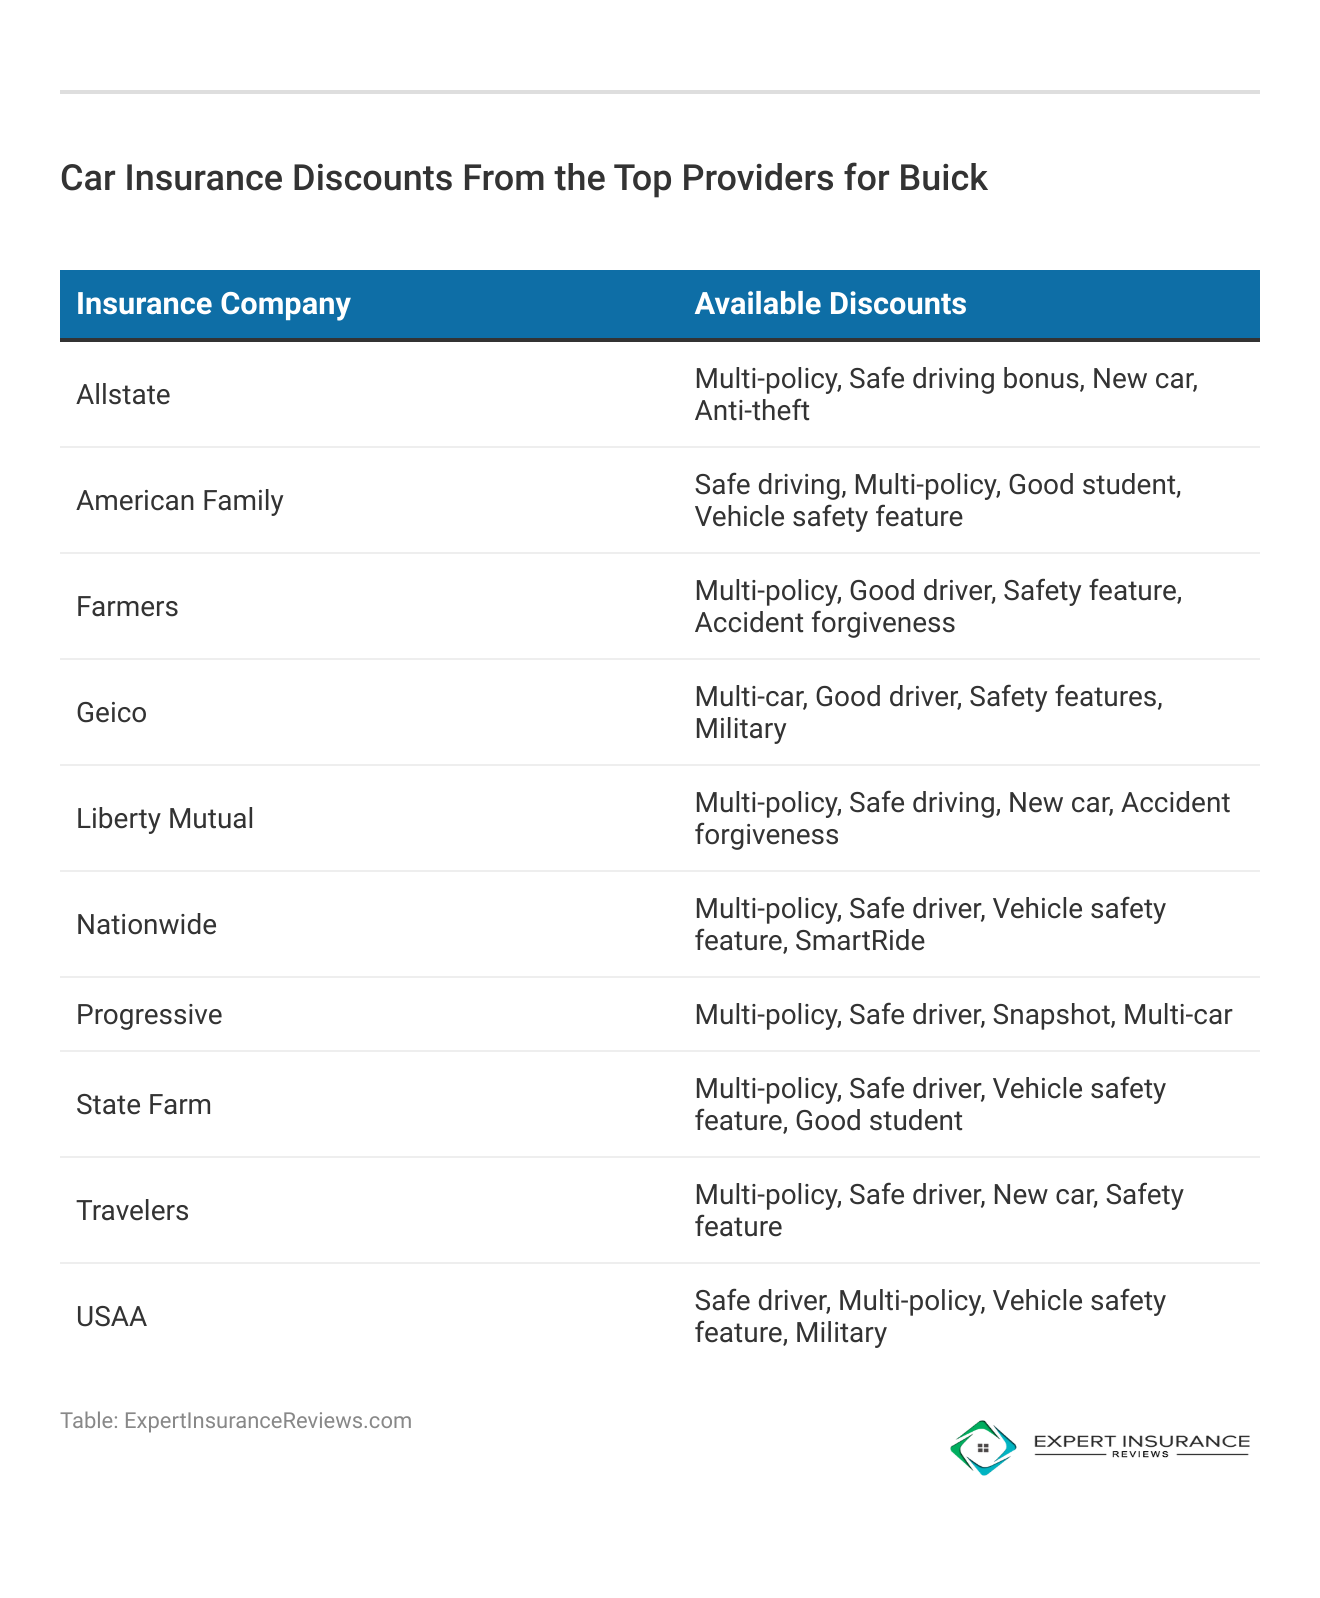 <h3>Car Insurance Discounts From the Top Providers for Buick</h3> 